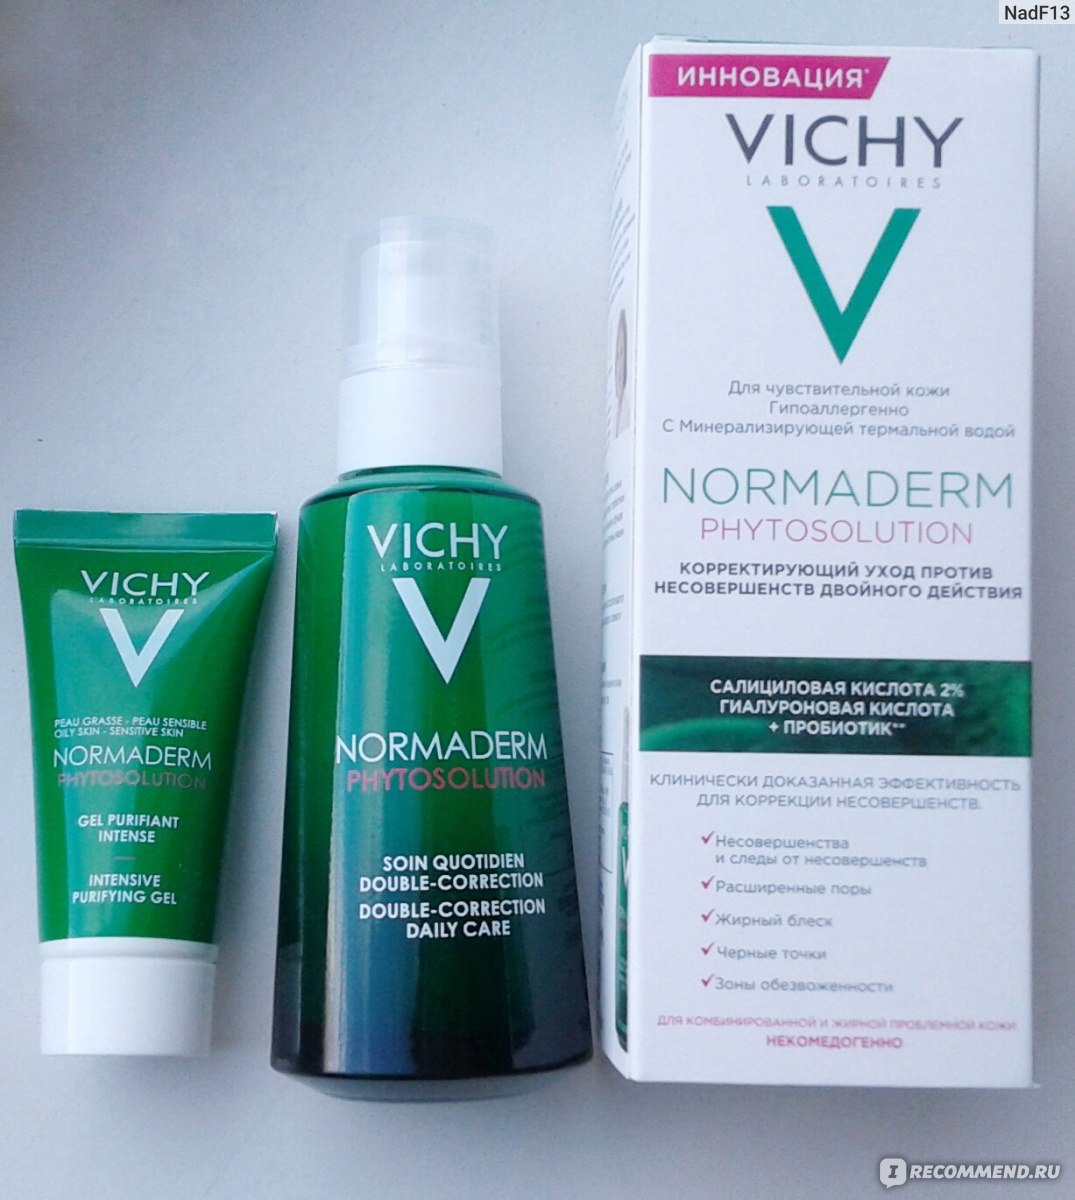 Normaderm phytosolution intensive purifying gel. Vichy Normaderm phytosolution. Vichy Normaderm phytosolution 3 мл. Виши умывалка Normaderm. Vichy Normaderm гель.